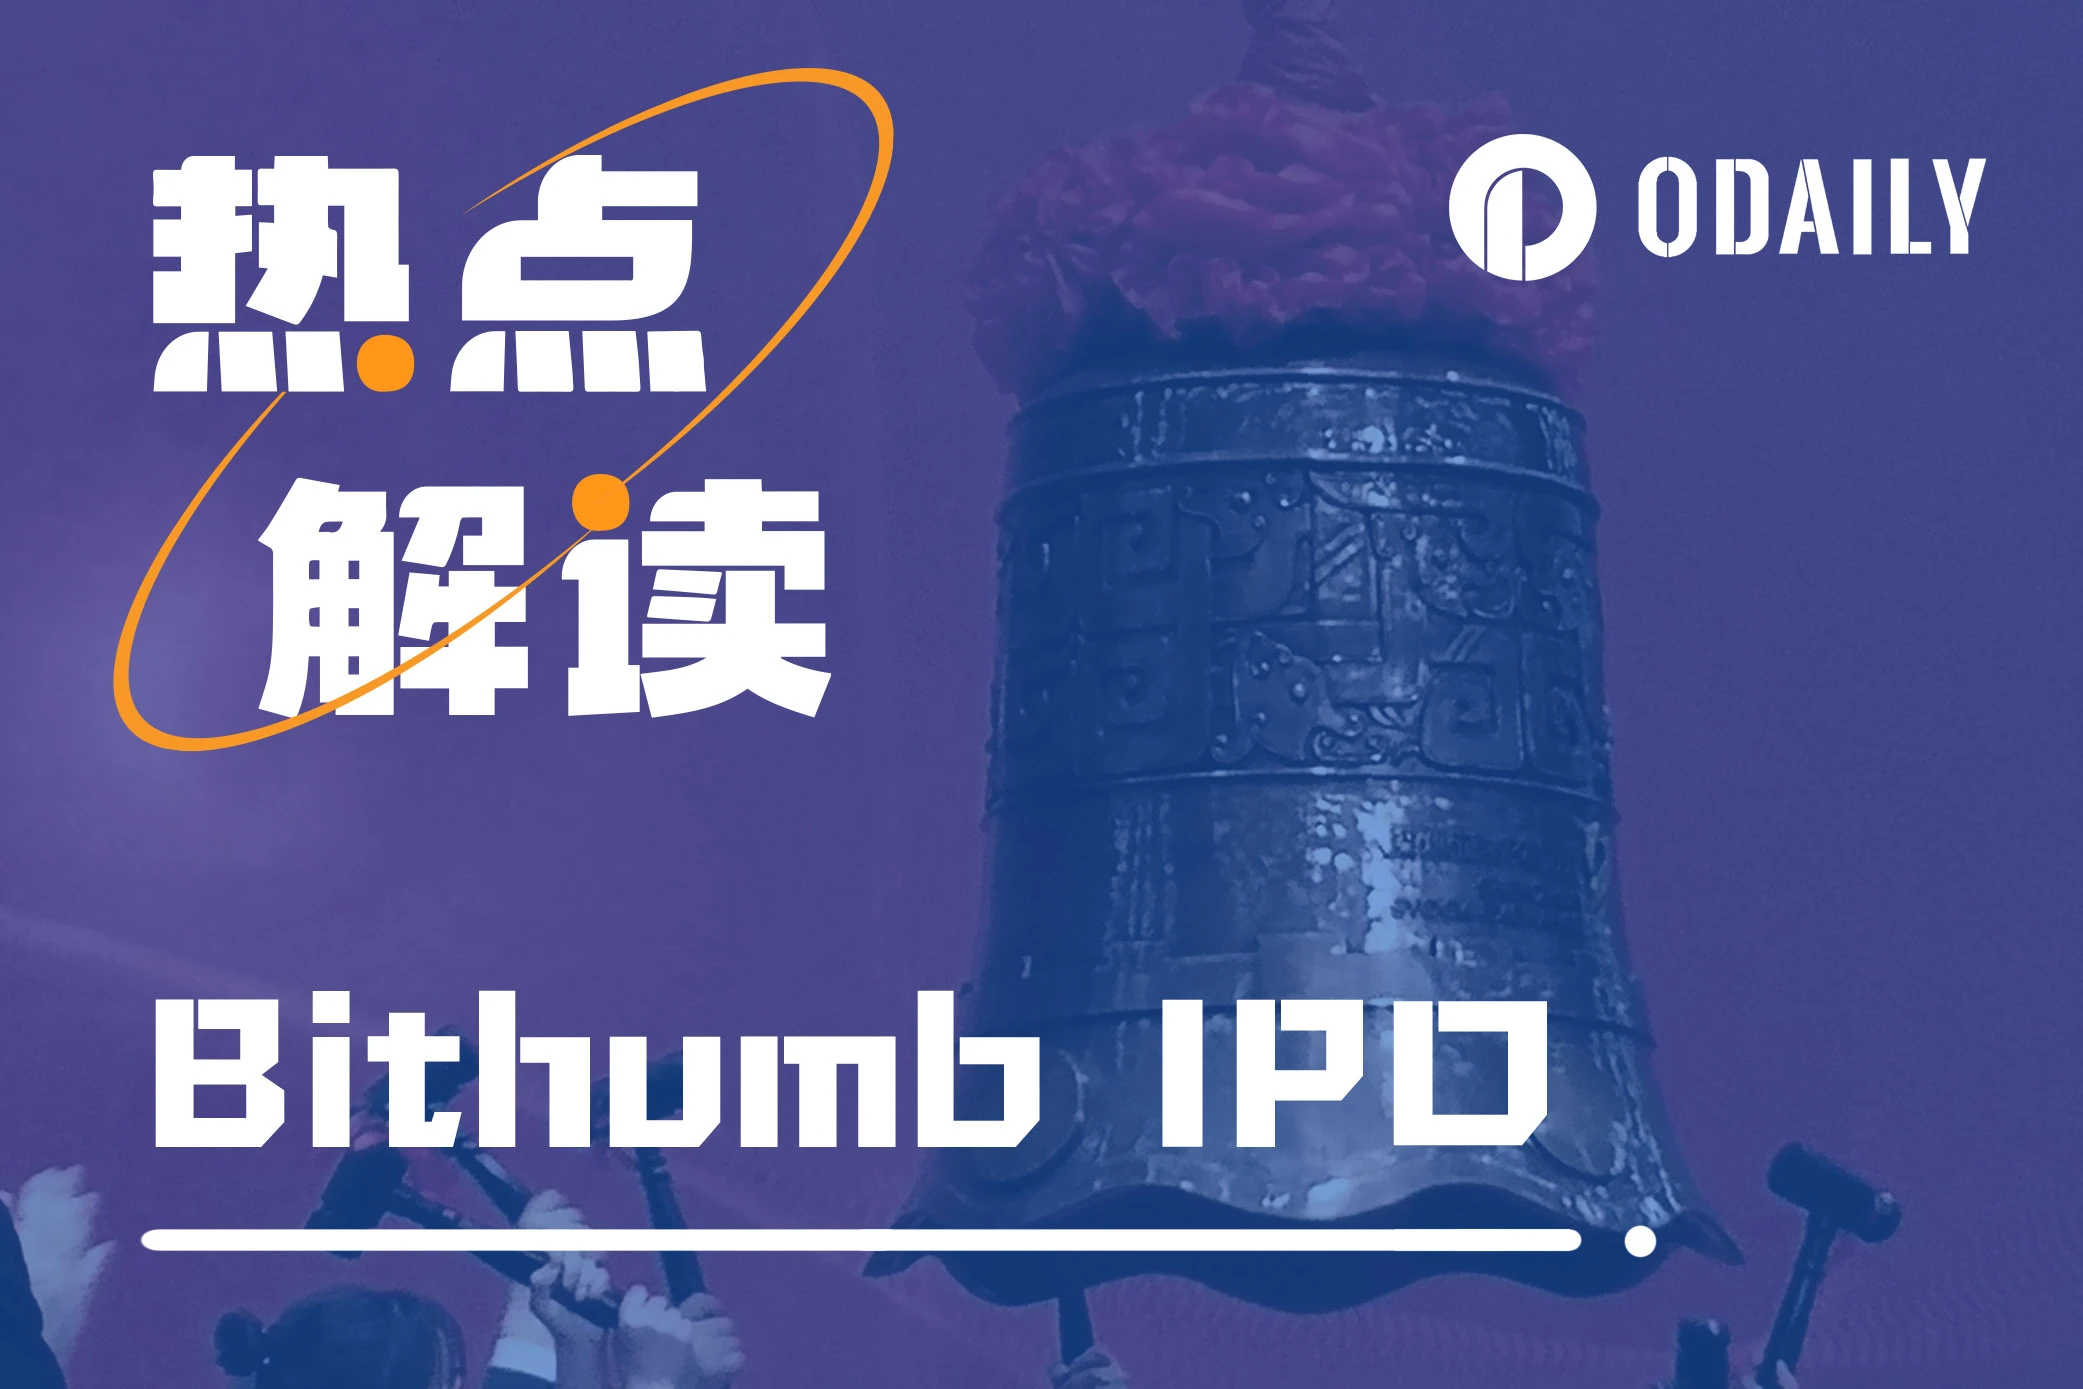 Bithumb attempts to go public again, trying to regain the No. 1 spot in the Korean market